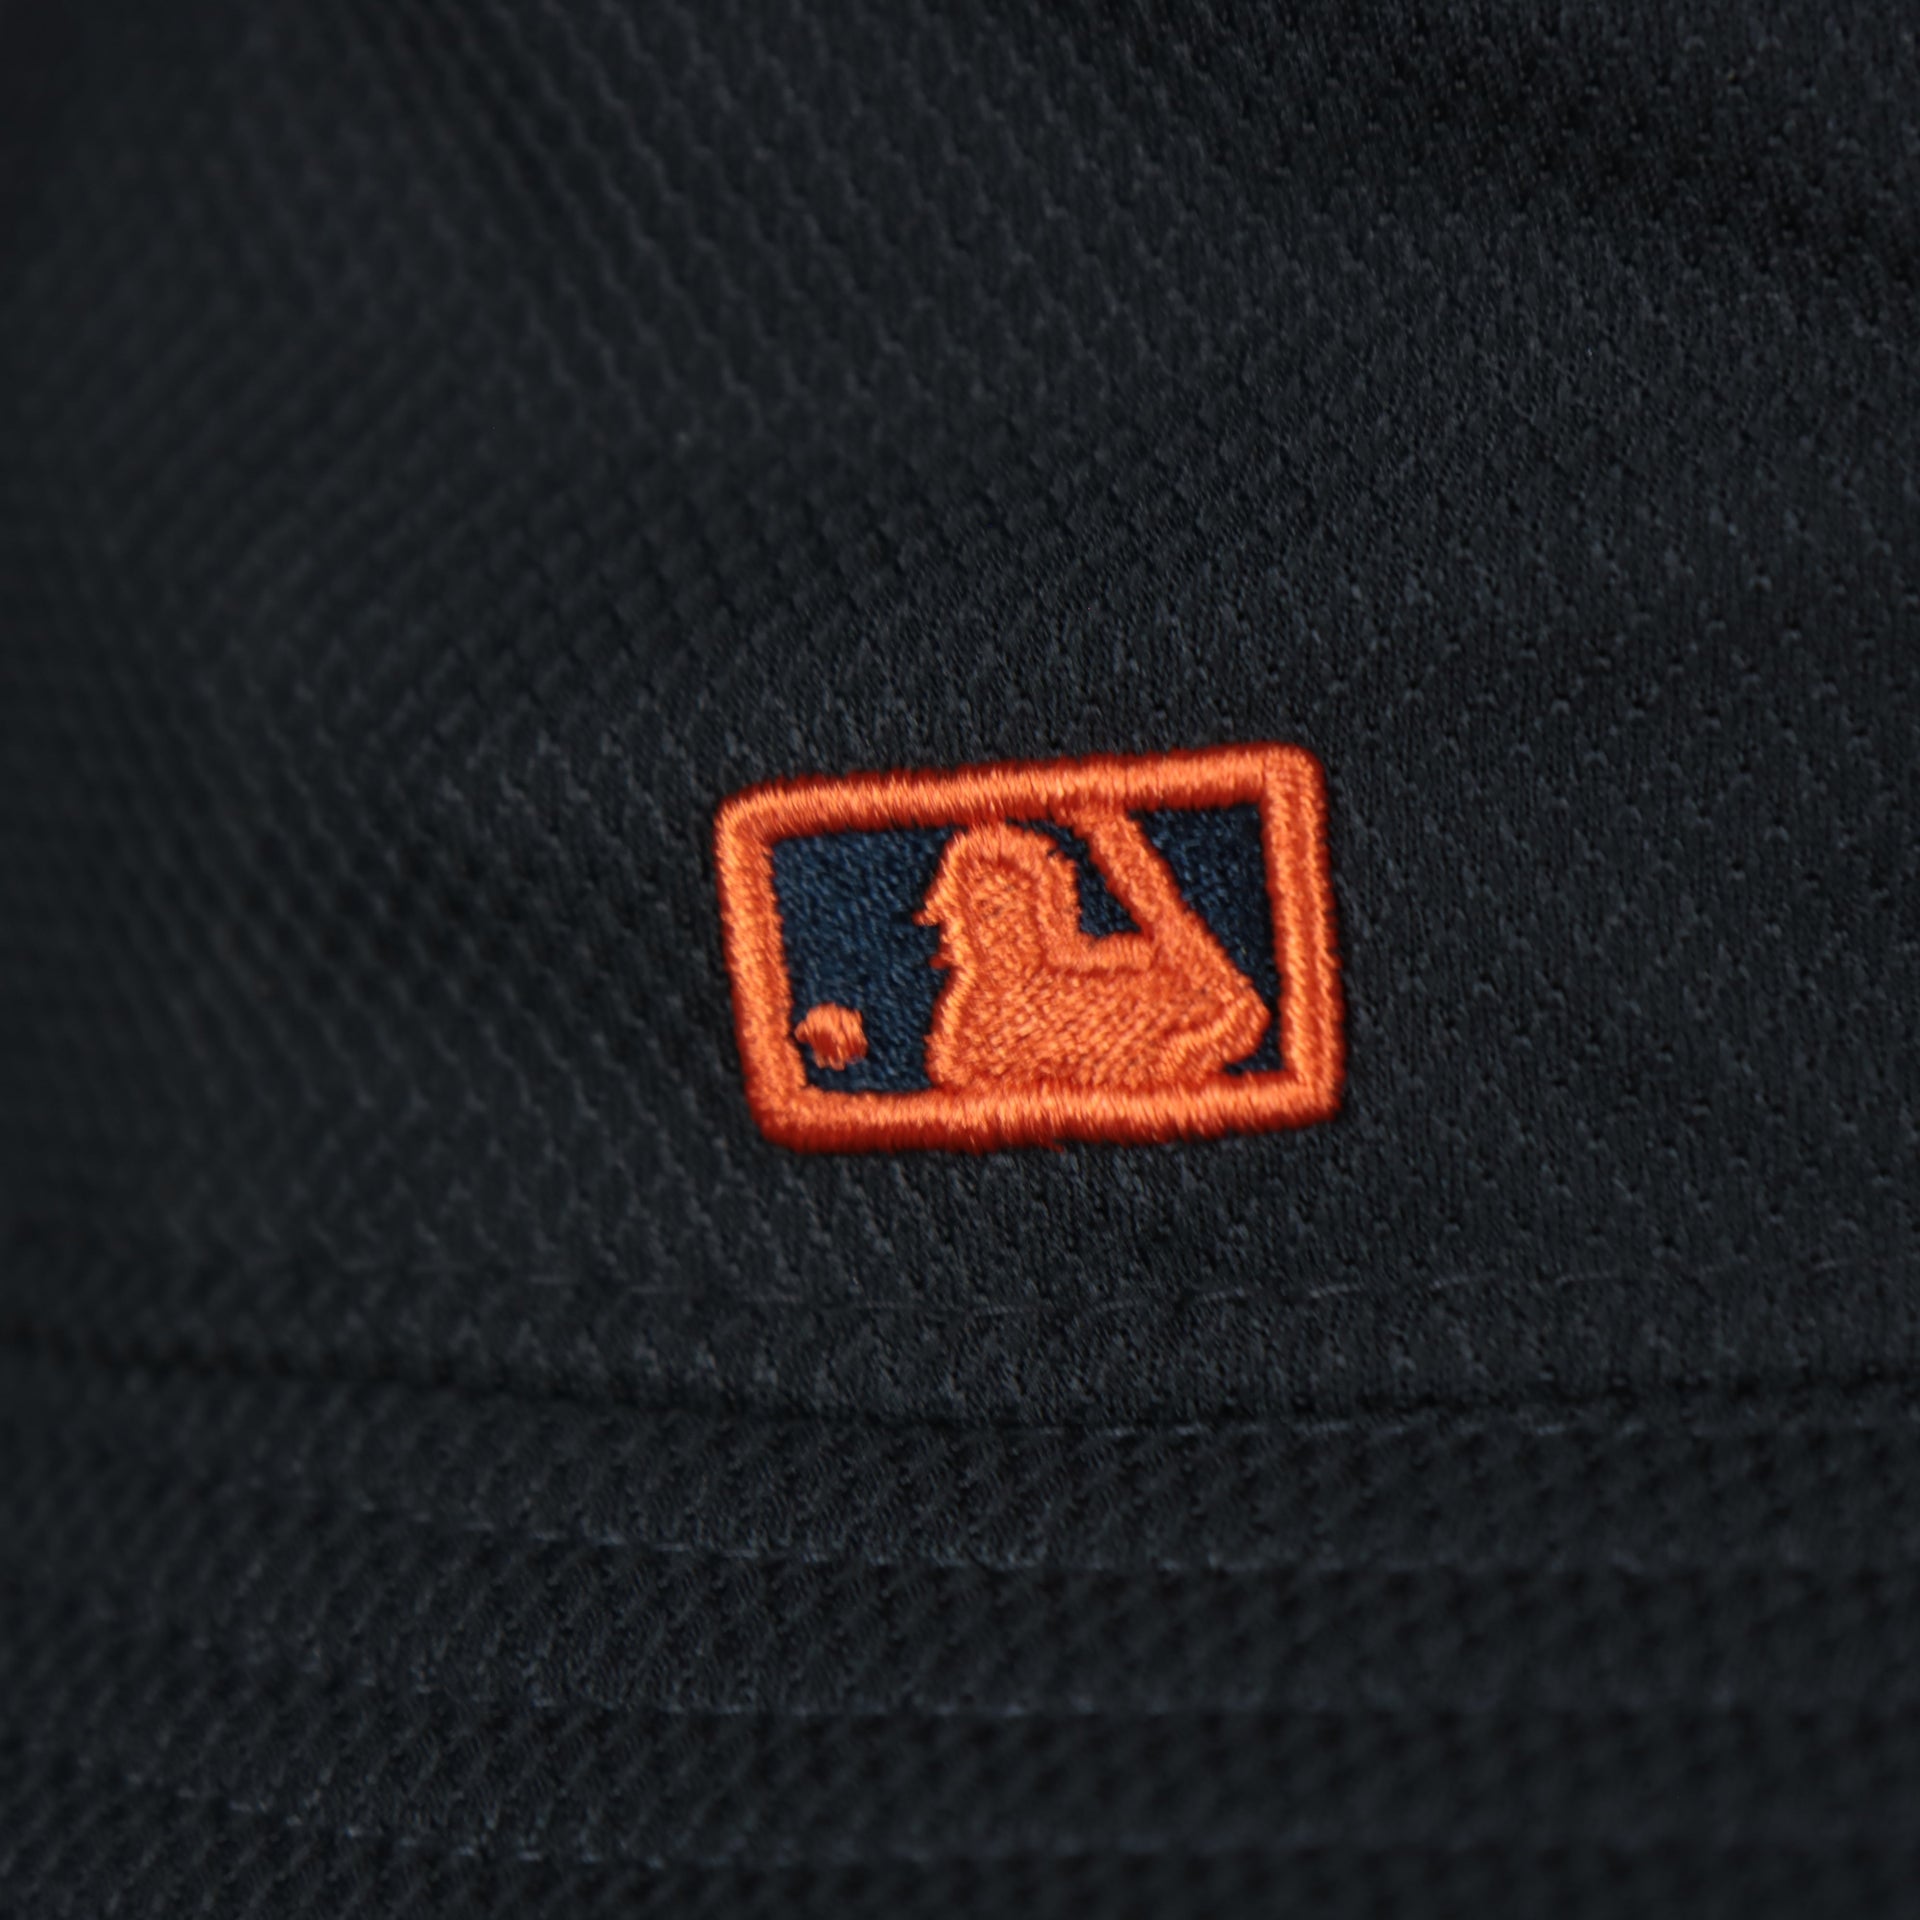 A close up of the MLB Batterman on the Houston Astros MLB 2022 Spring Training Onfield Bucket Hat